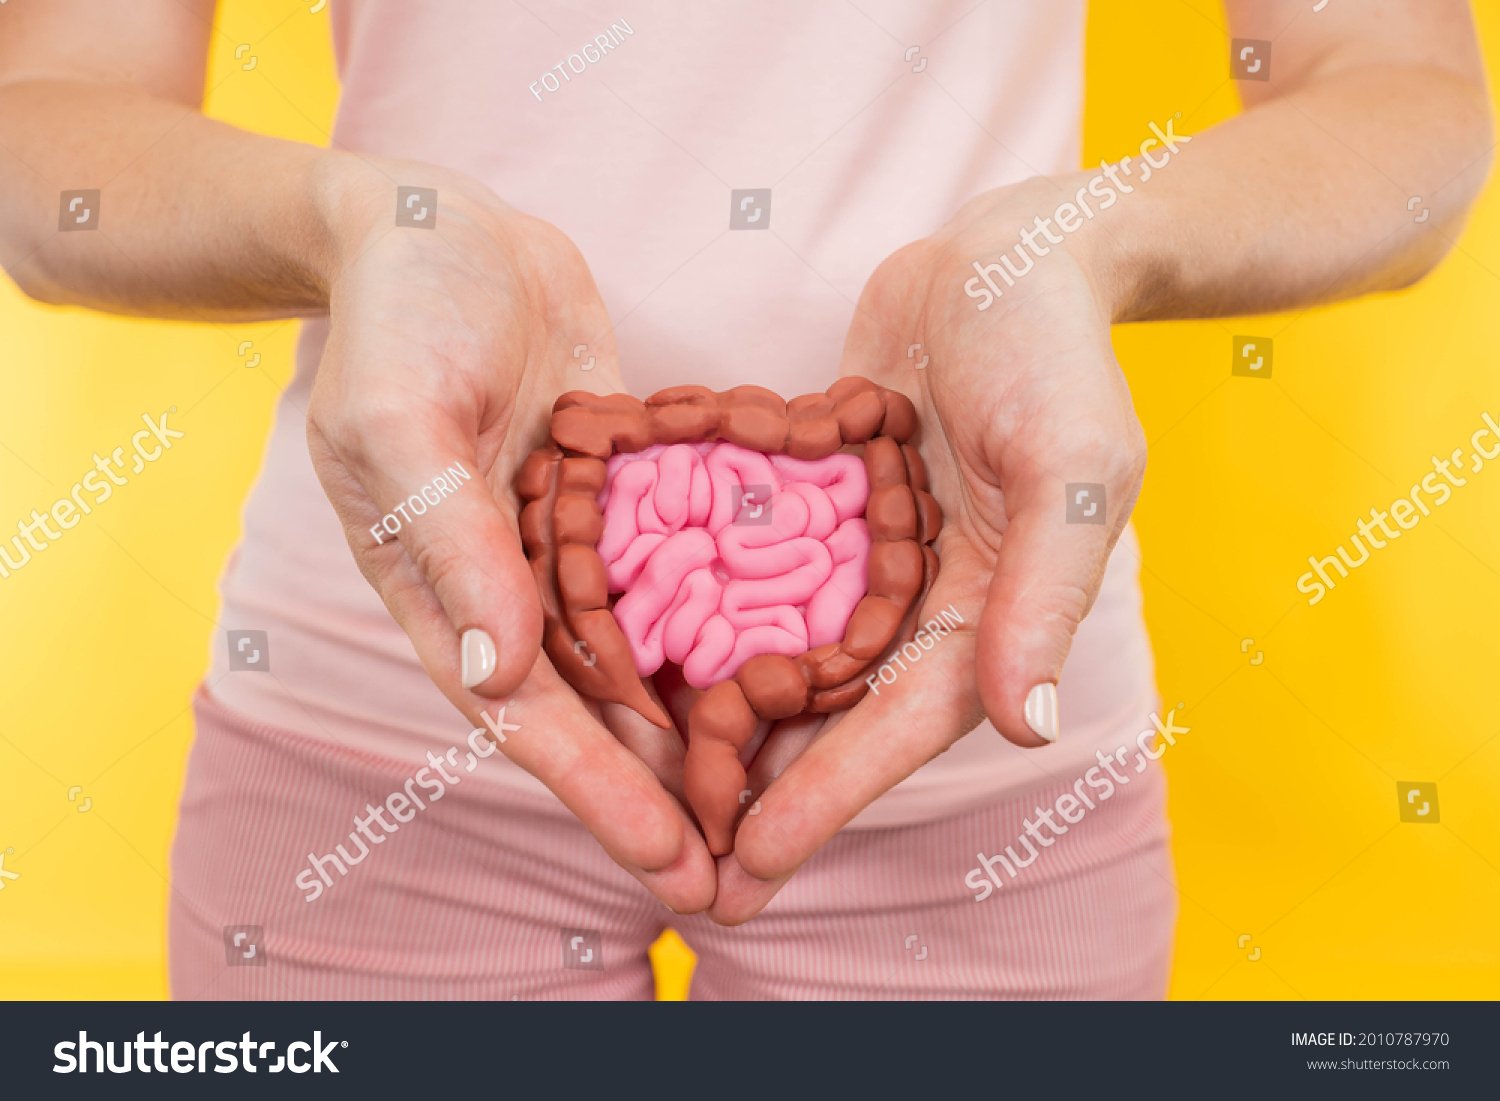 Health of the intestinal tract. Intestinal tract in hands of a woman. She demonstrates it in front of her. Gastrointestinal tract health care concept. Health of digestive human organs. #2010787970